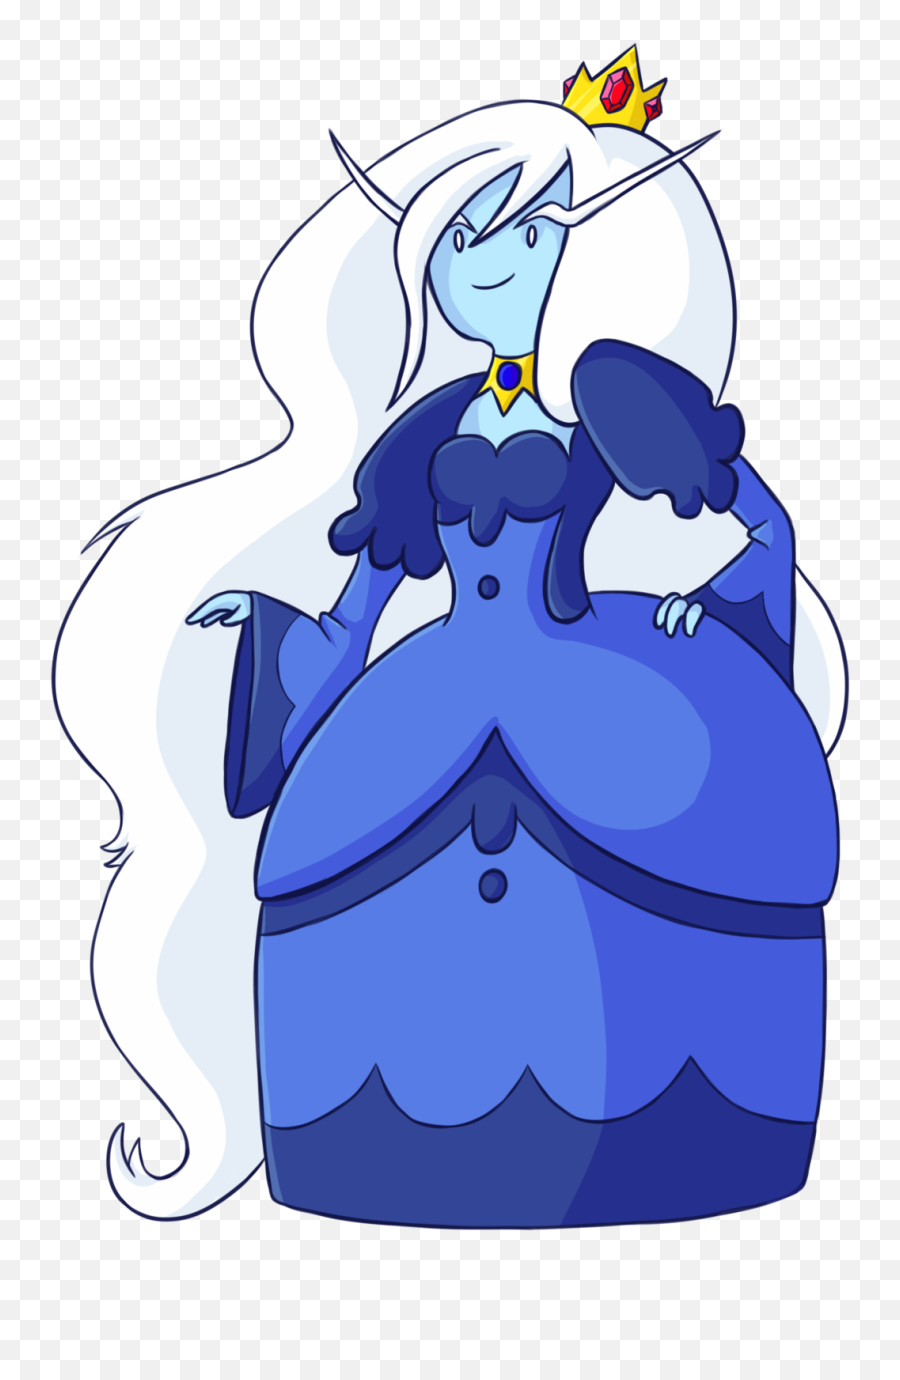 Fairy Tale Characters - Ice Queen From Adventure Time Emoji,Fairy Tail Emojis